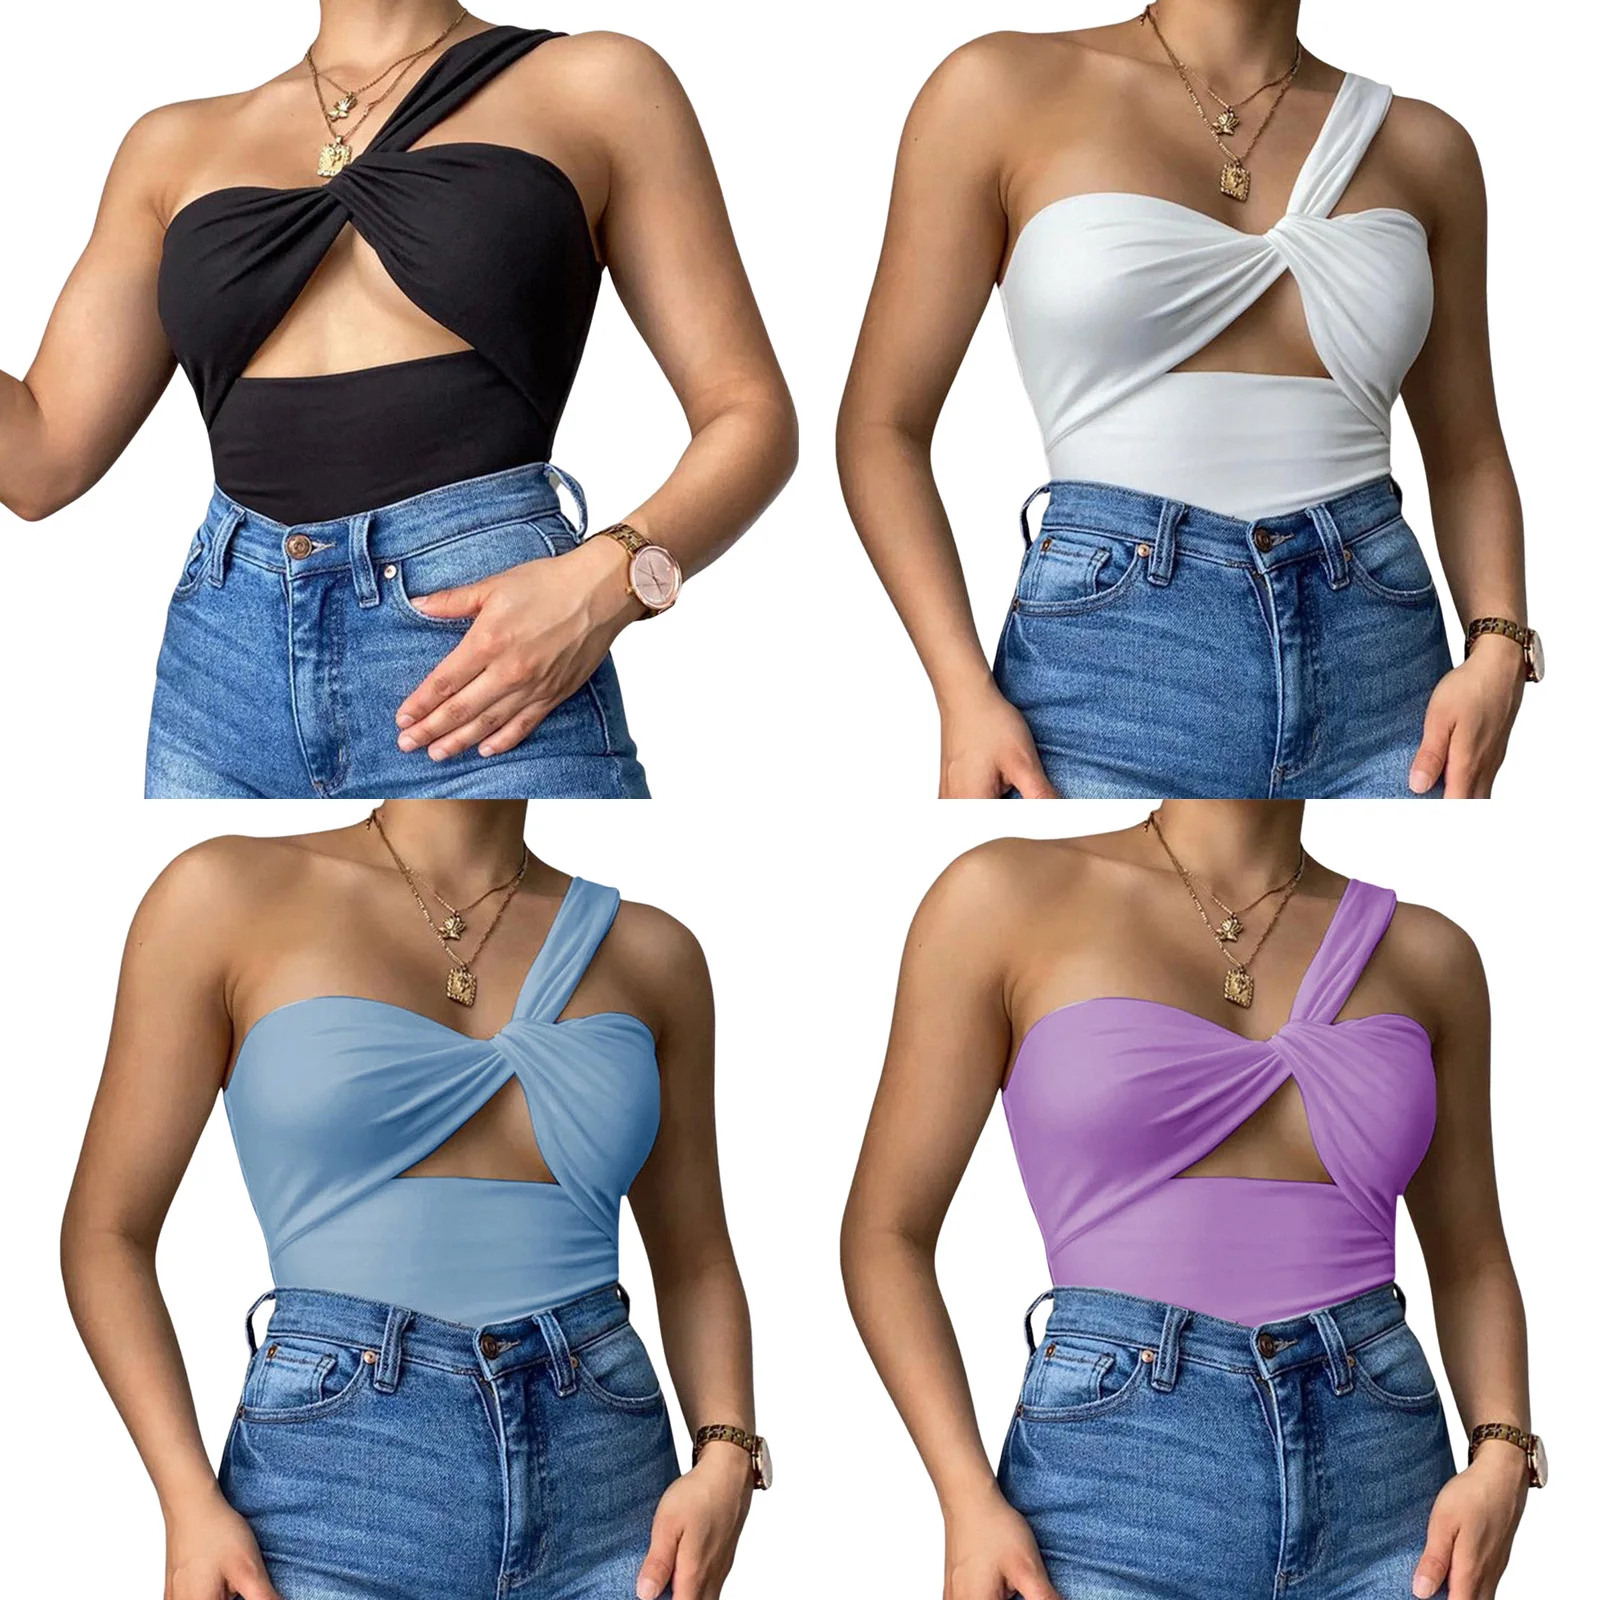 

2021 New Women’s Fashion Solid Color Knotted Vest Sexy Oblique Shoulder Hollow Slim Fit Sleeveless Tops